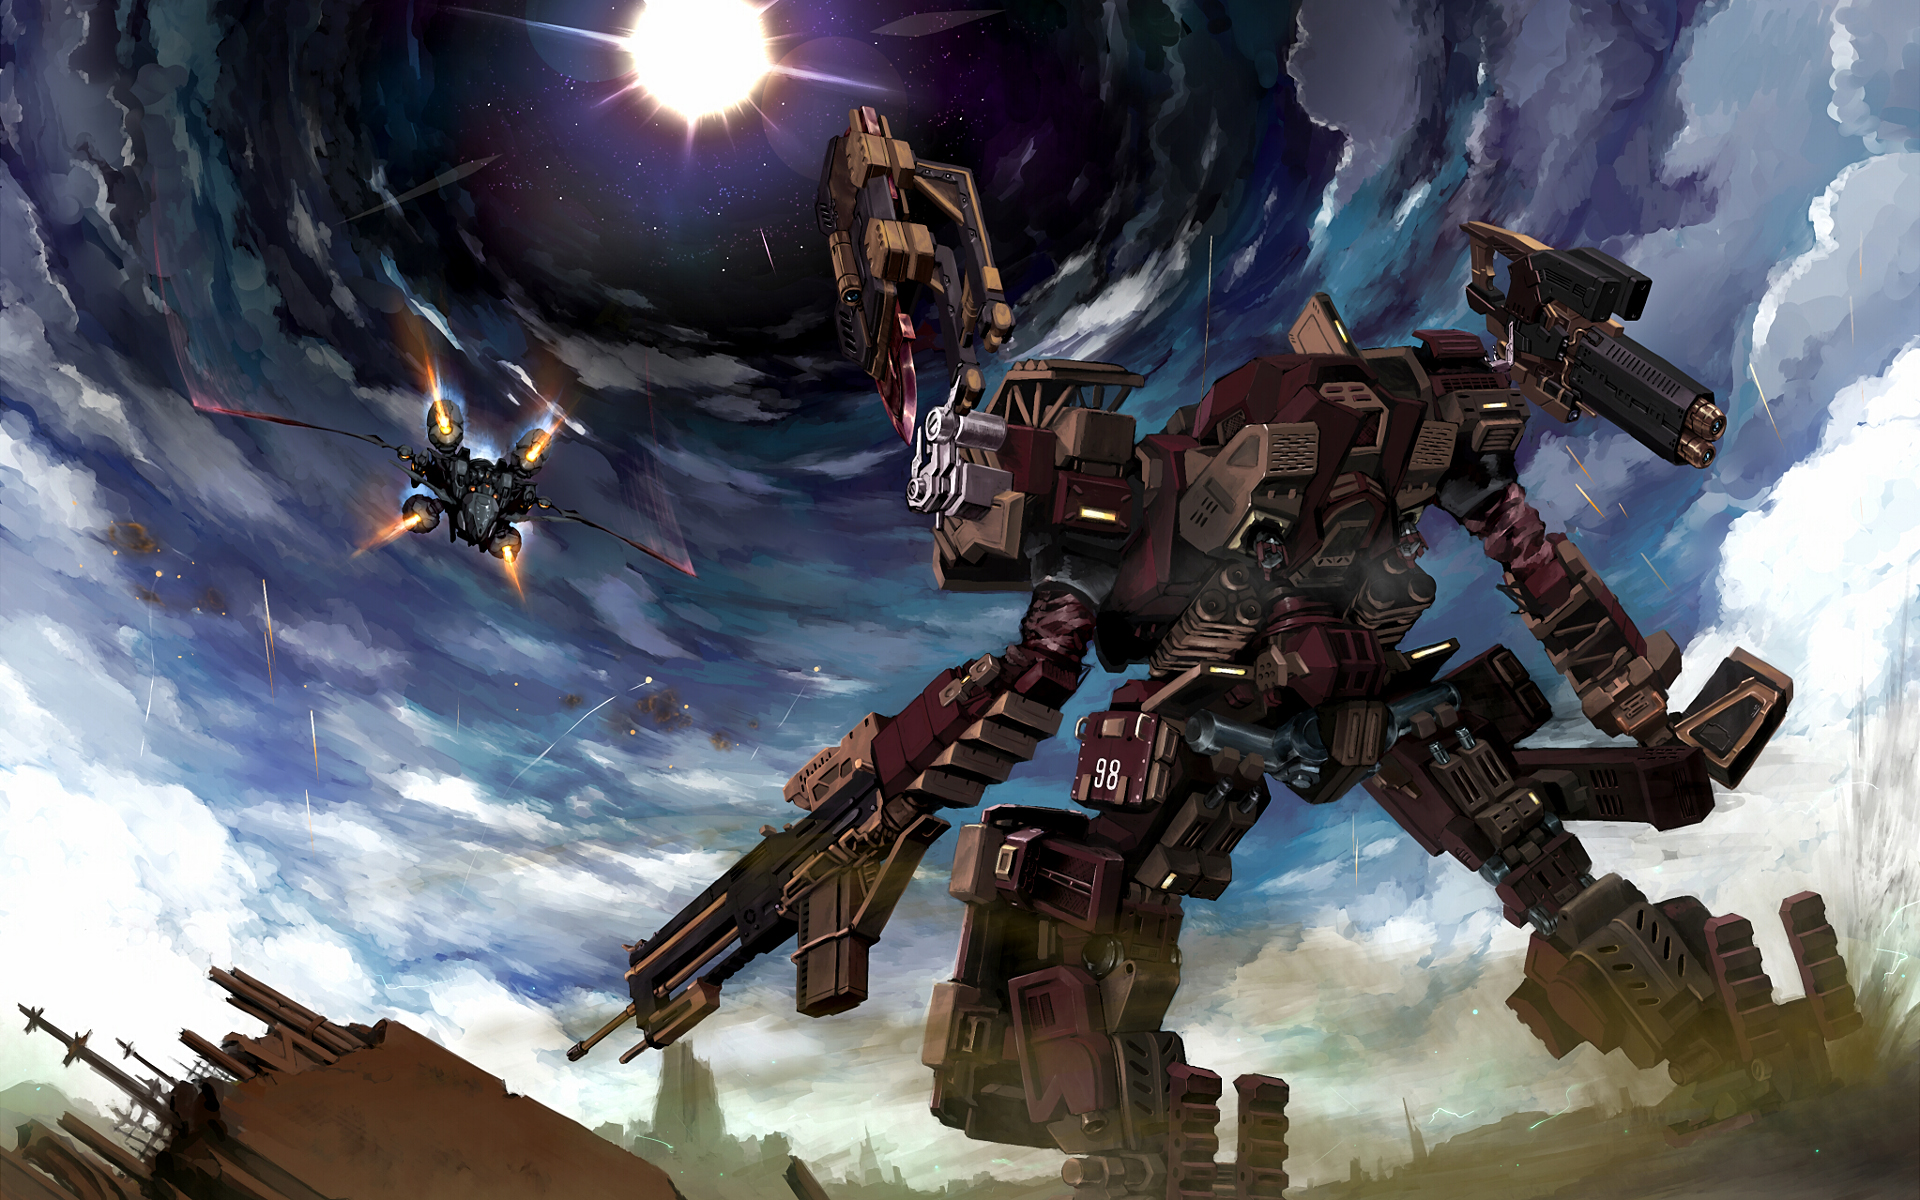 Video Game Armored Core Wallpaper